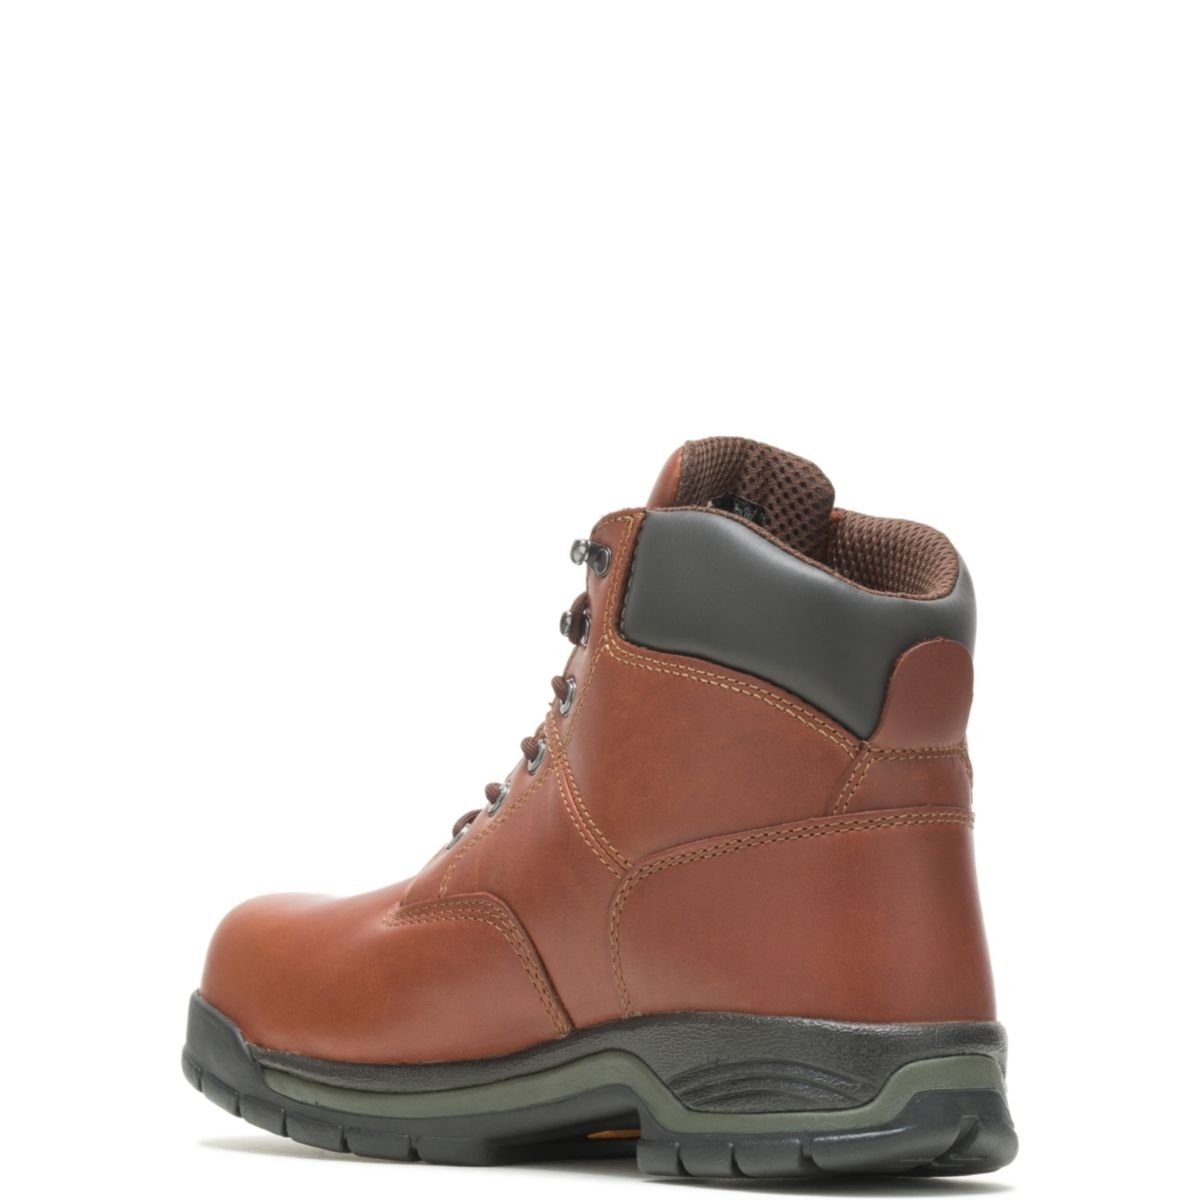 WOLVERINE Men's Harrison 6 Lace-Up SoftToe Work Boot Brown - W04906 Varies BROWN - BROWN, 7.5